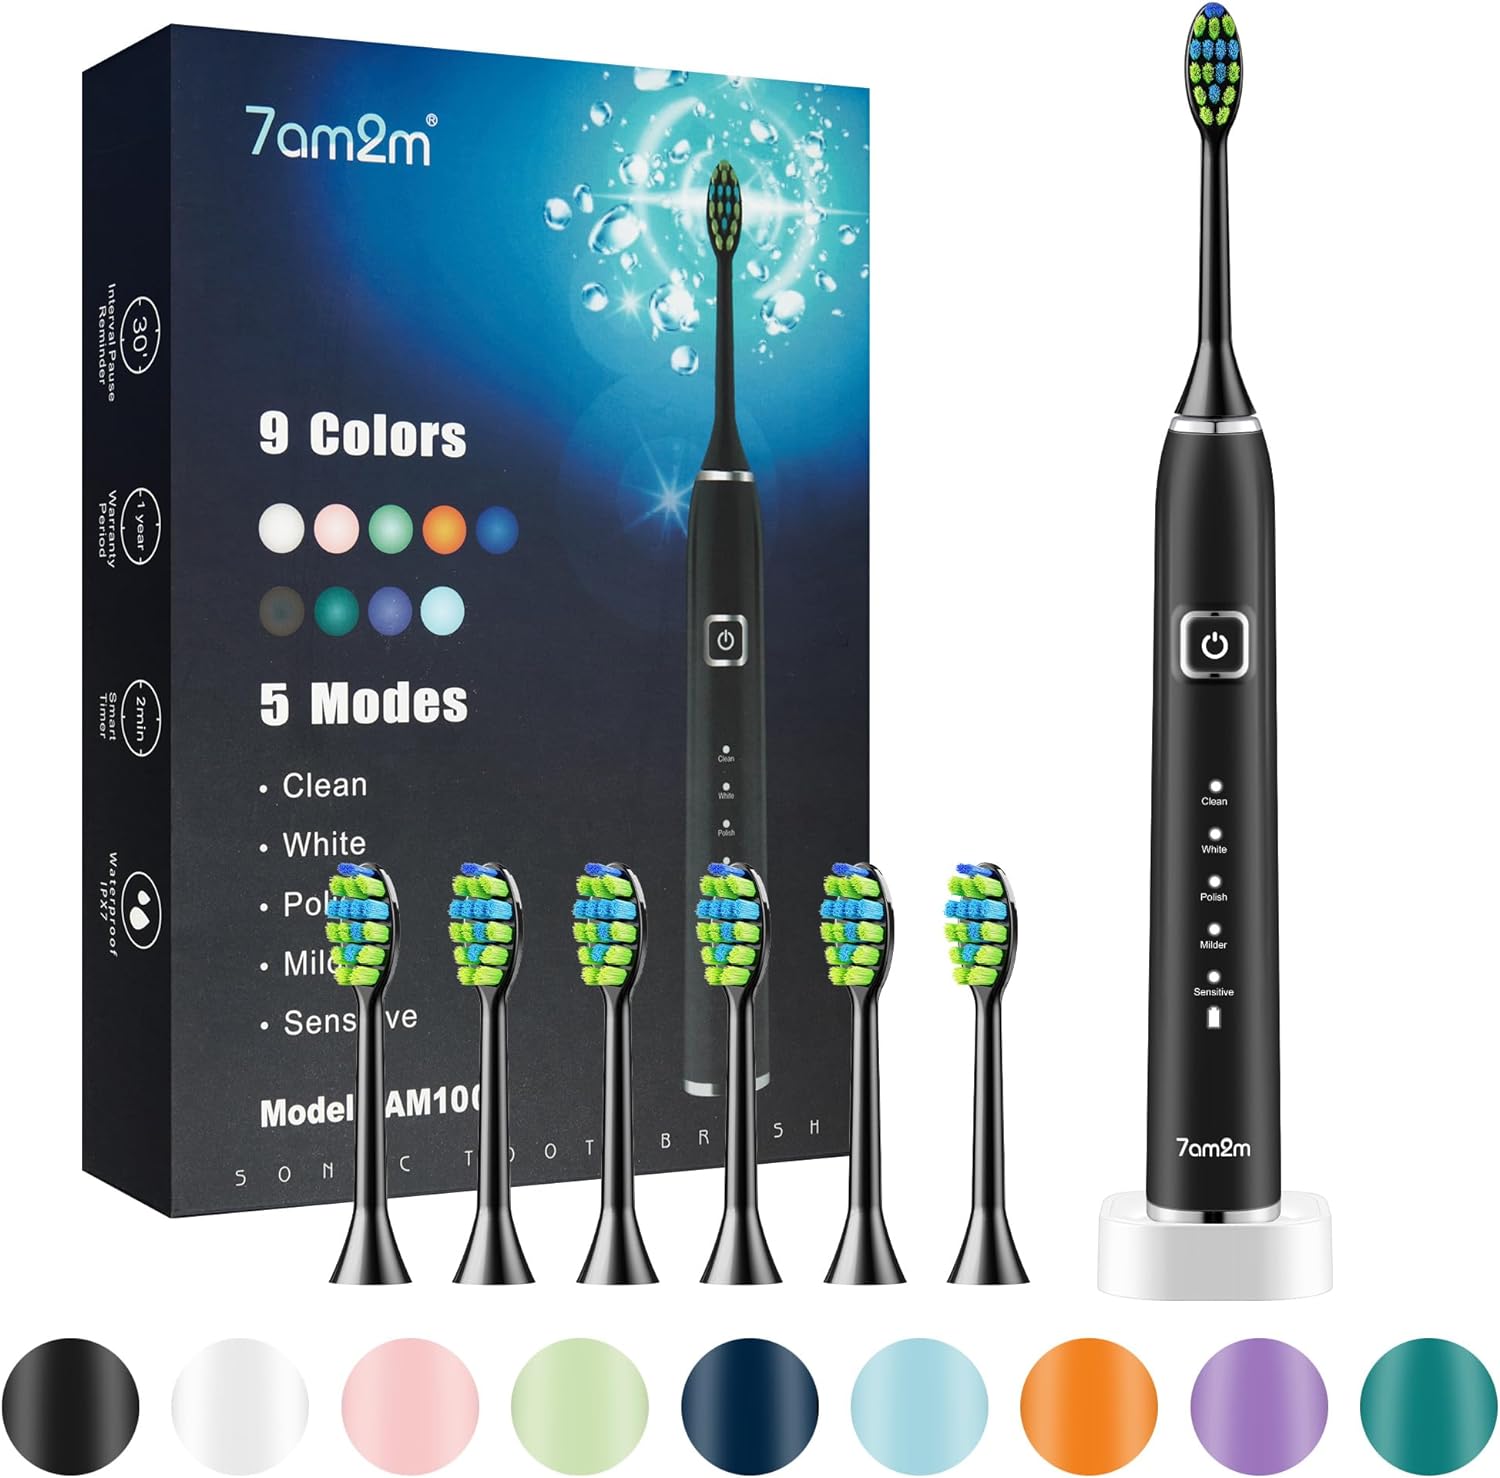 Sonic Smart Electric Toothbrush - One Charge for 90 Days - 5 Modes With 2 Minutes Smart Timer - Electric Toothbrushes